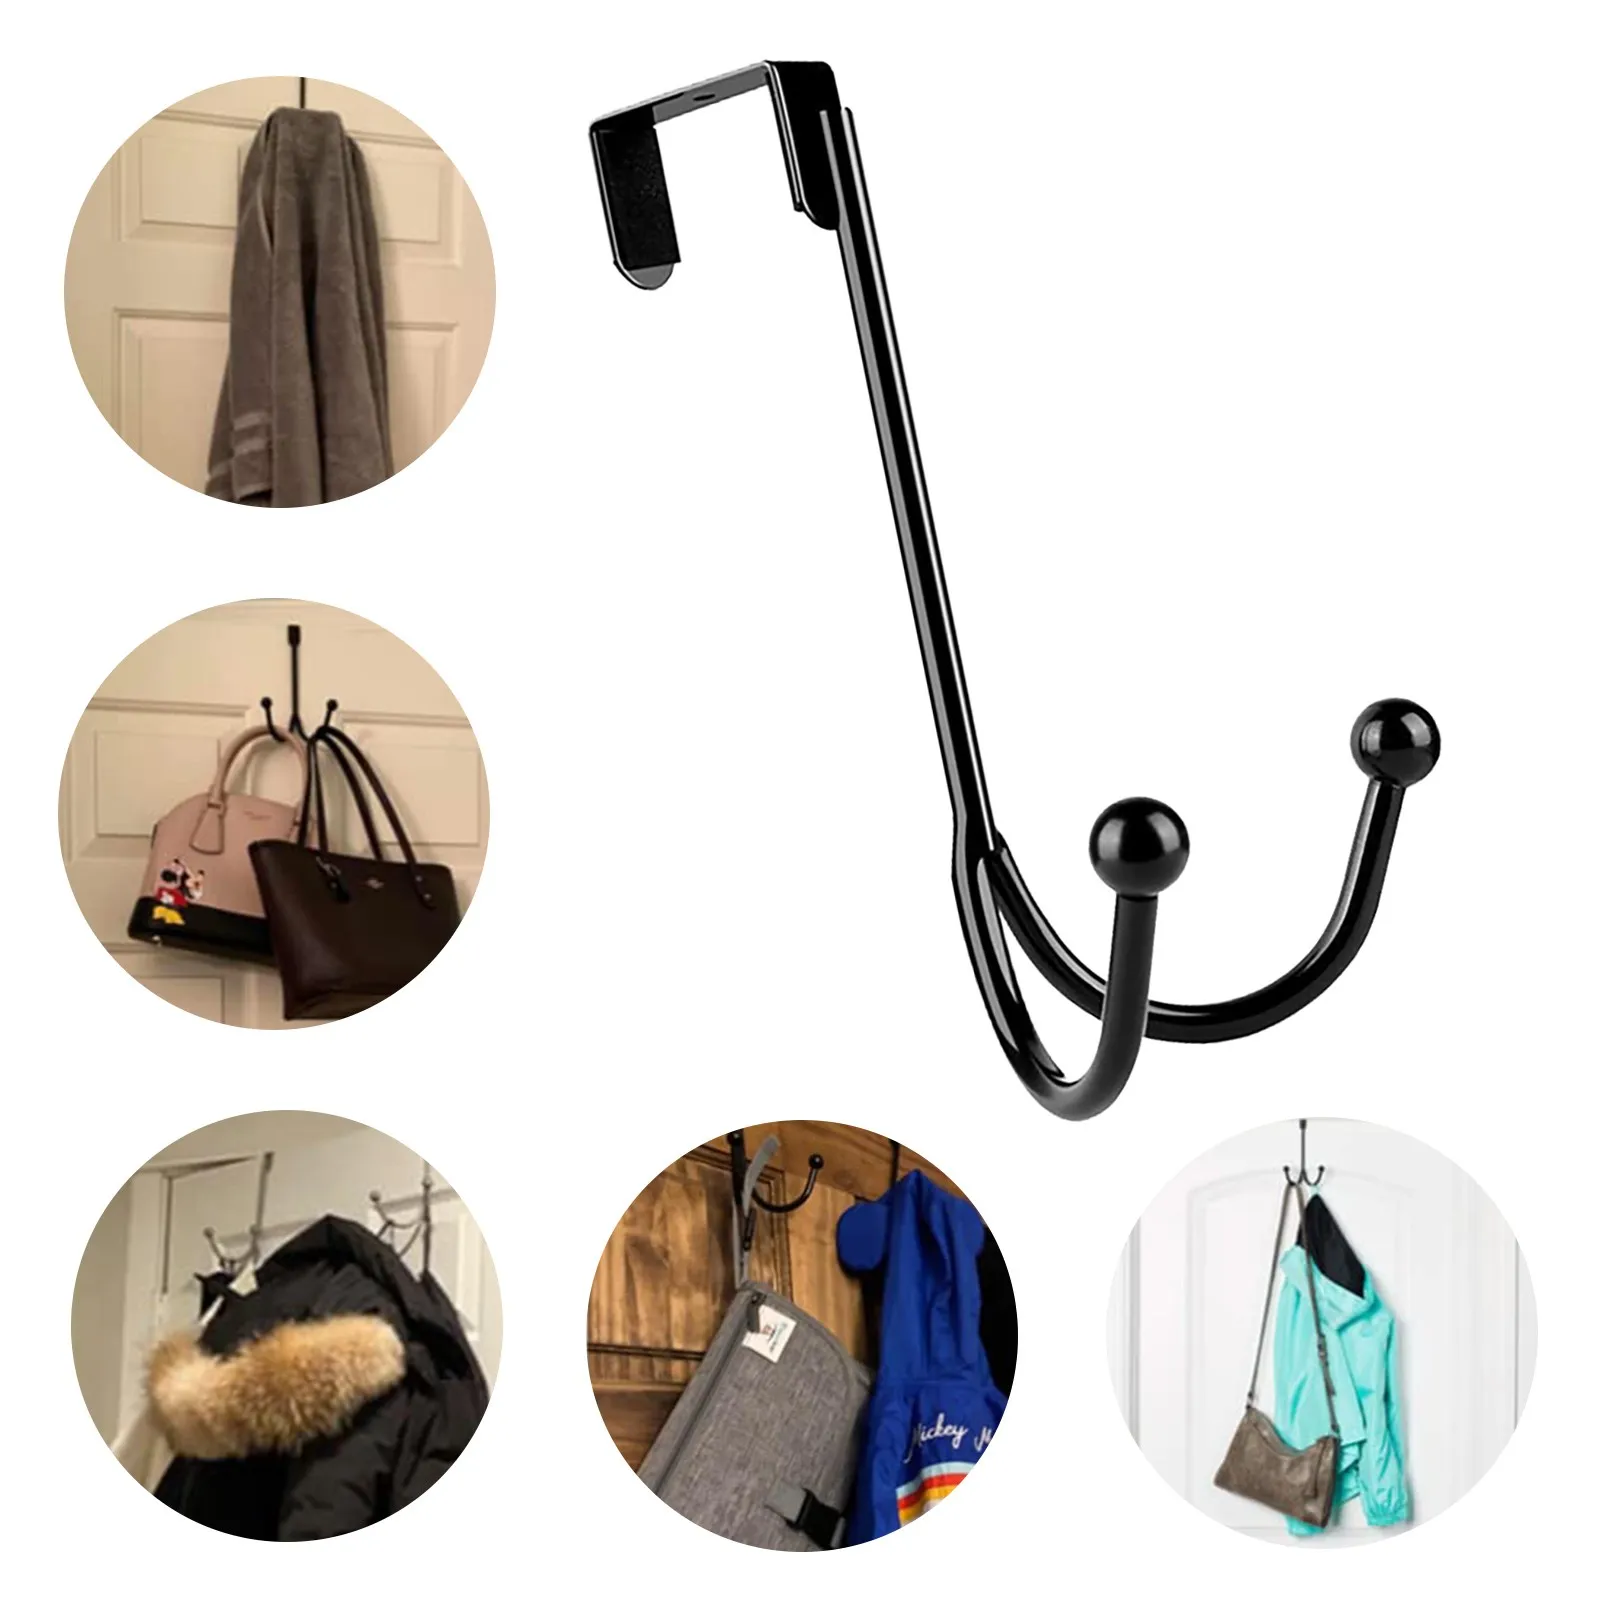 

1/2/3pcs Over the Door Double Hanger Hooks 1 Pack Metal Twin Hooks Organizer for Hanging Clothes Coats Hats Robes